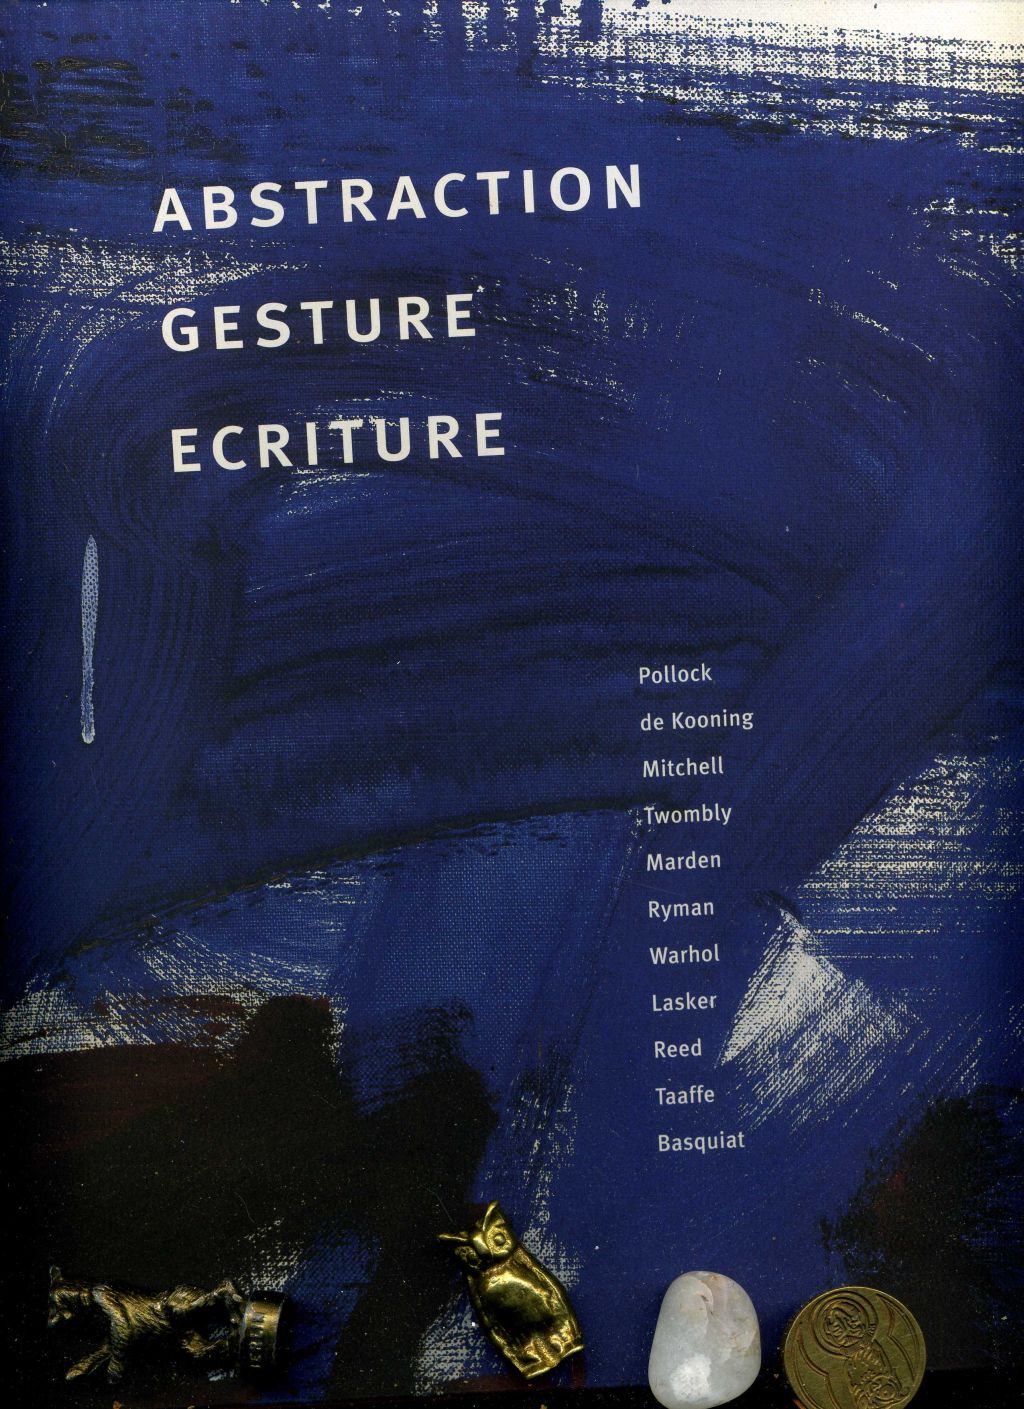 Abstraction, Gesture, Ecriture: Paintings from the Daros Collection. - Yve-Alain Bois / , Enrique Juncosa / , Rosalind E. Krauss / , Richard D. Marshall